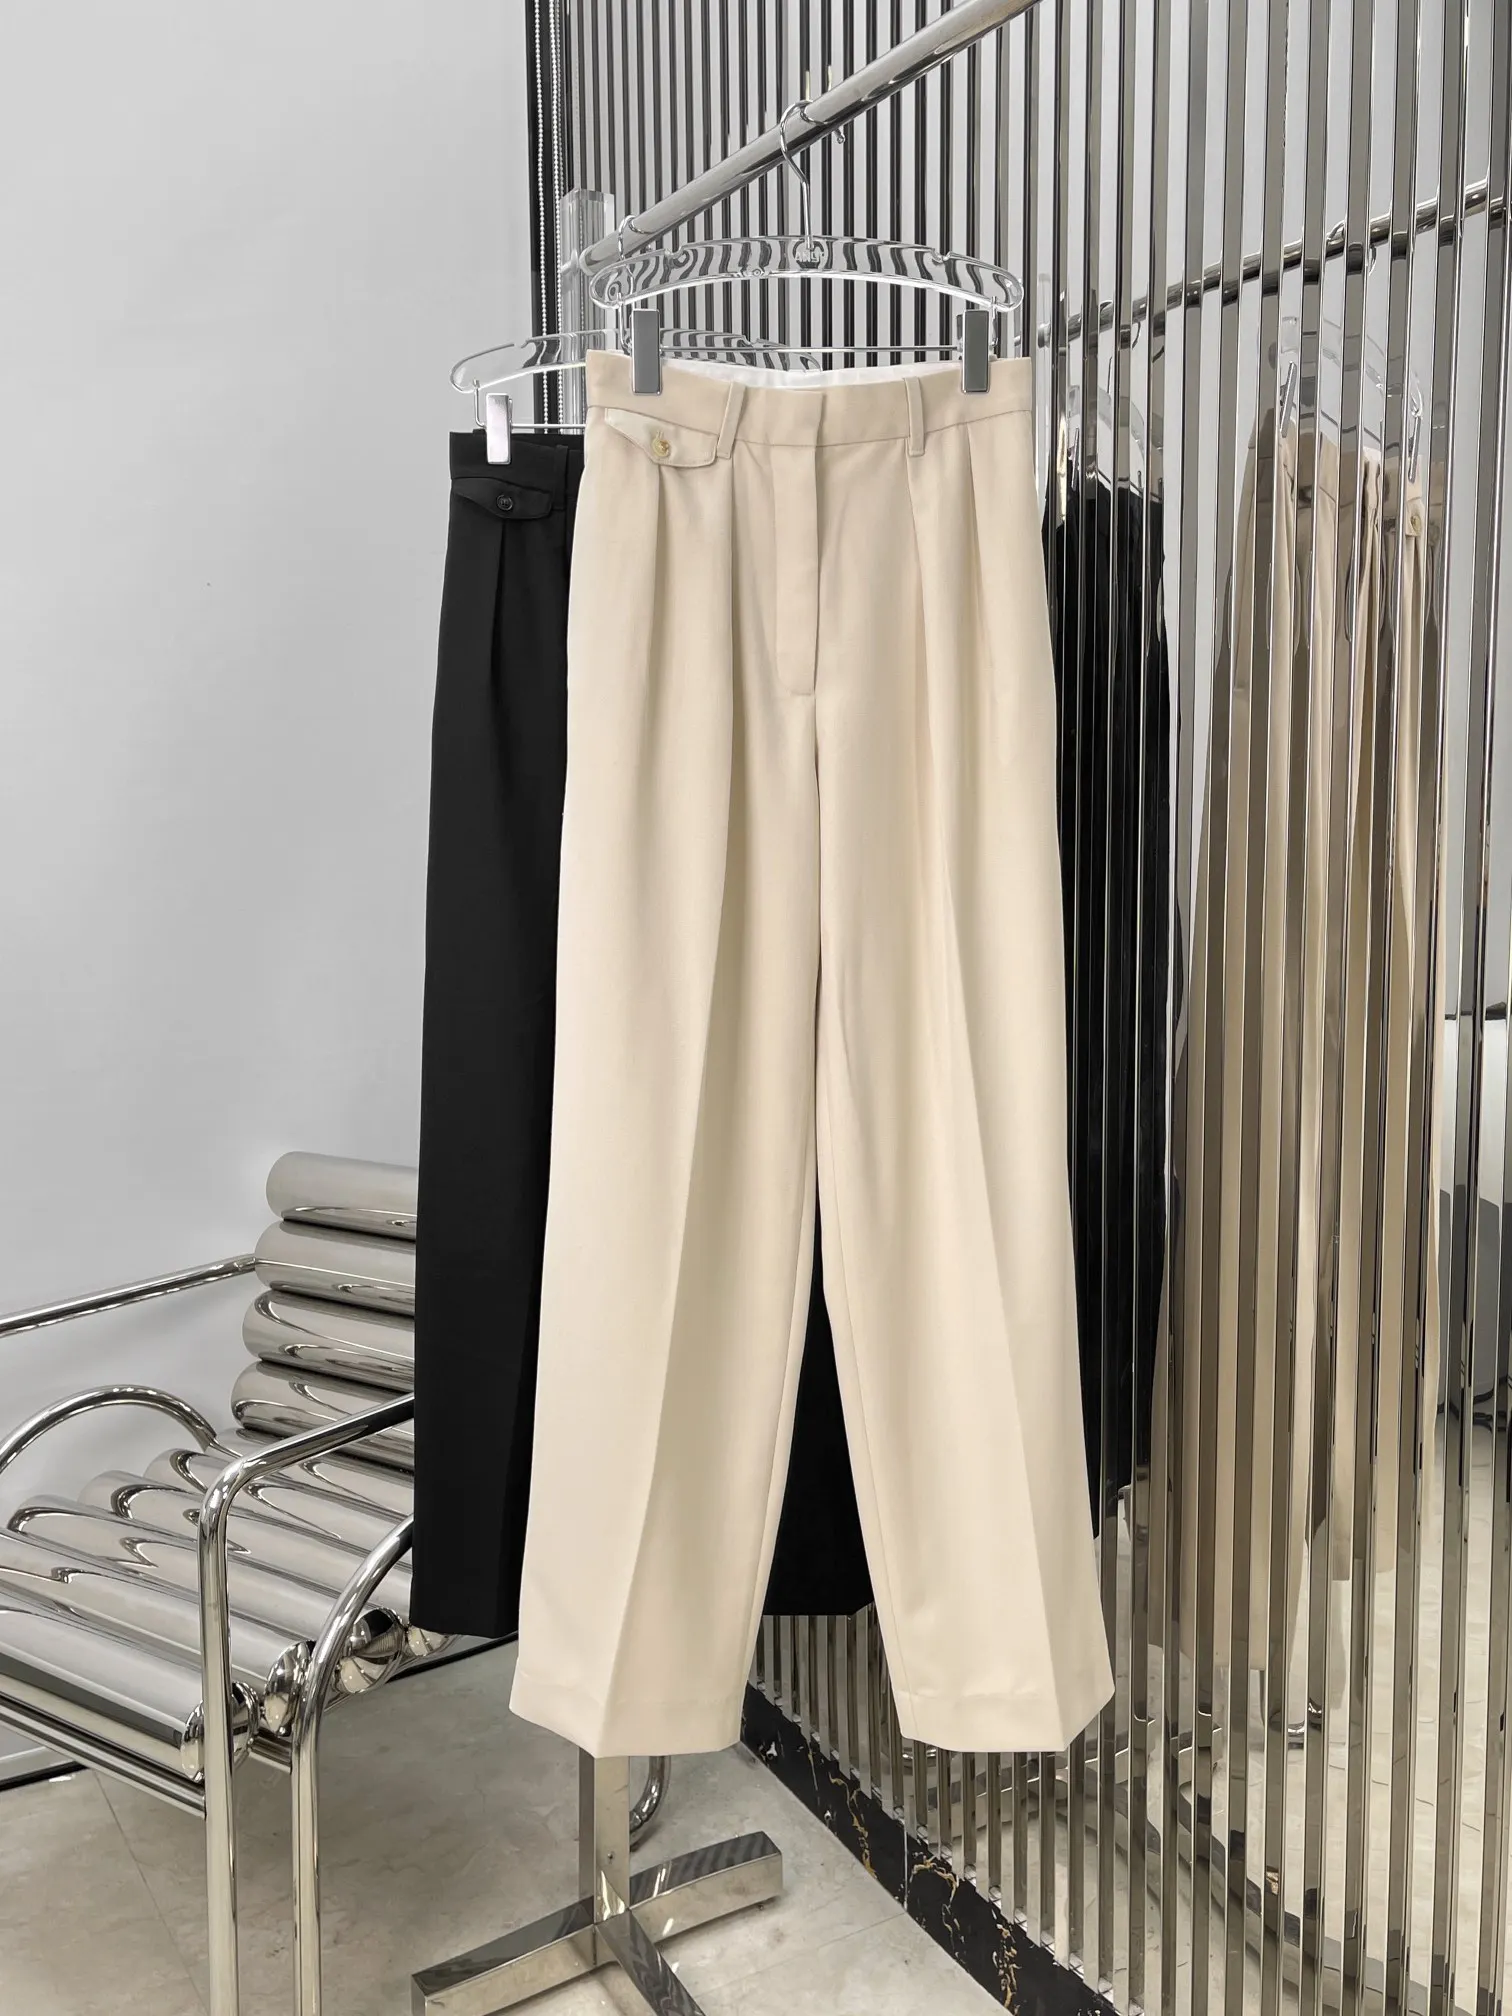 2023 spring and summer women's clothing fashion new Minimalist Casual Trousers 0621